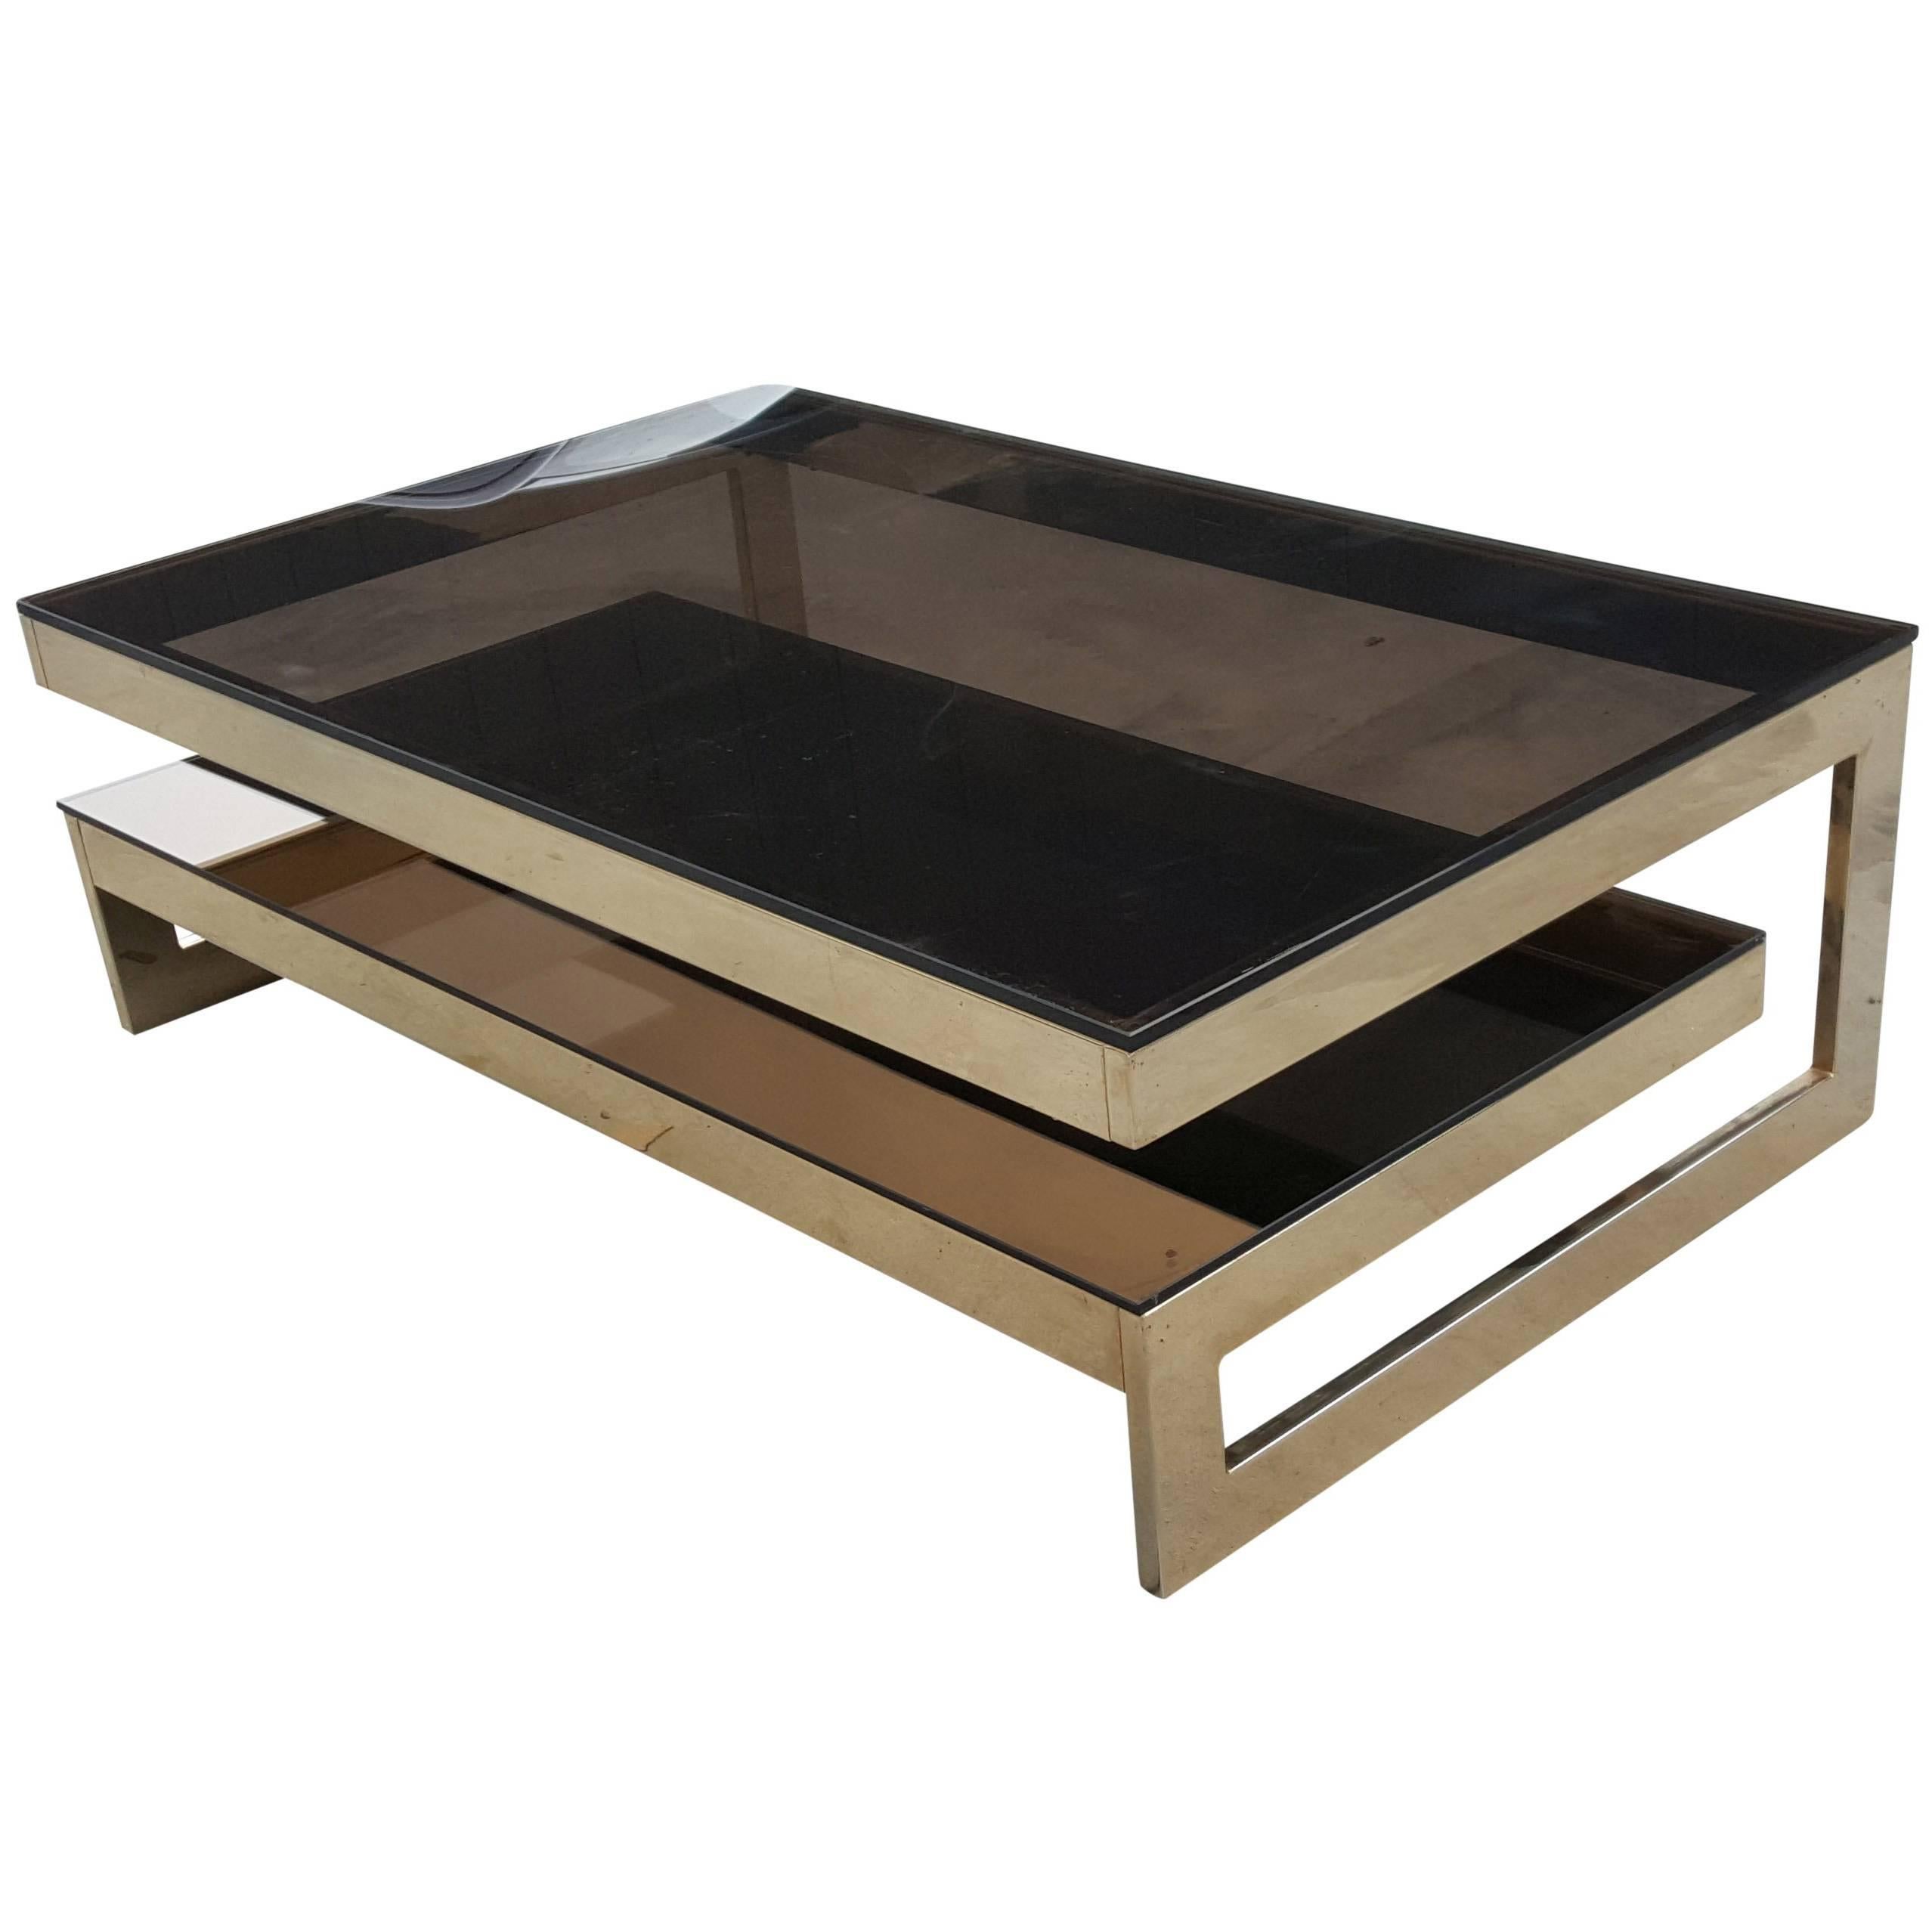 G-Shaped, Gold-Plated Coffee Table by Belgo Chrome For Sale